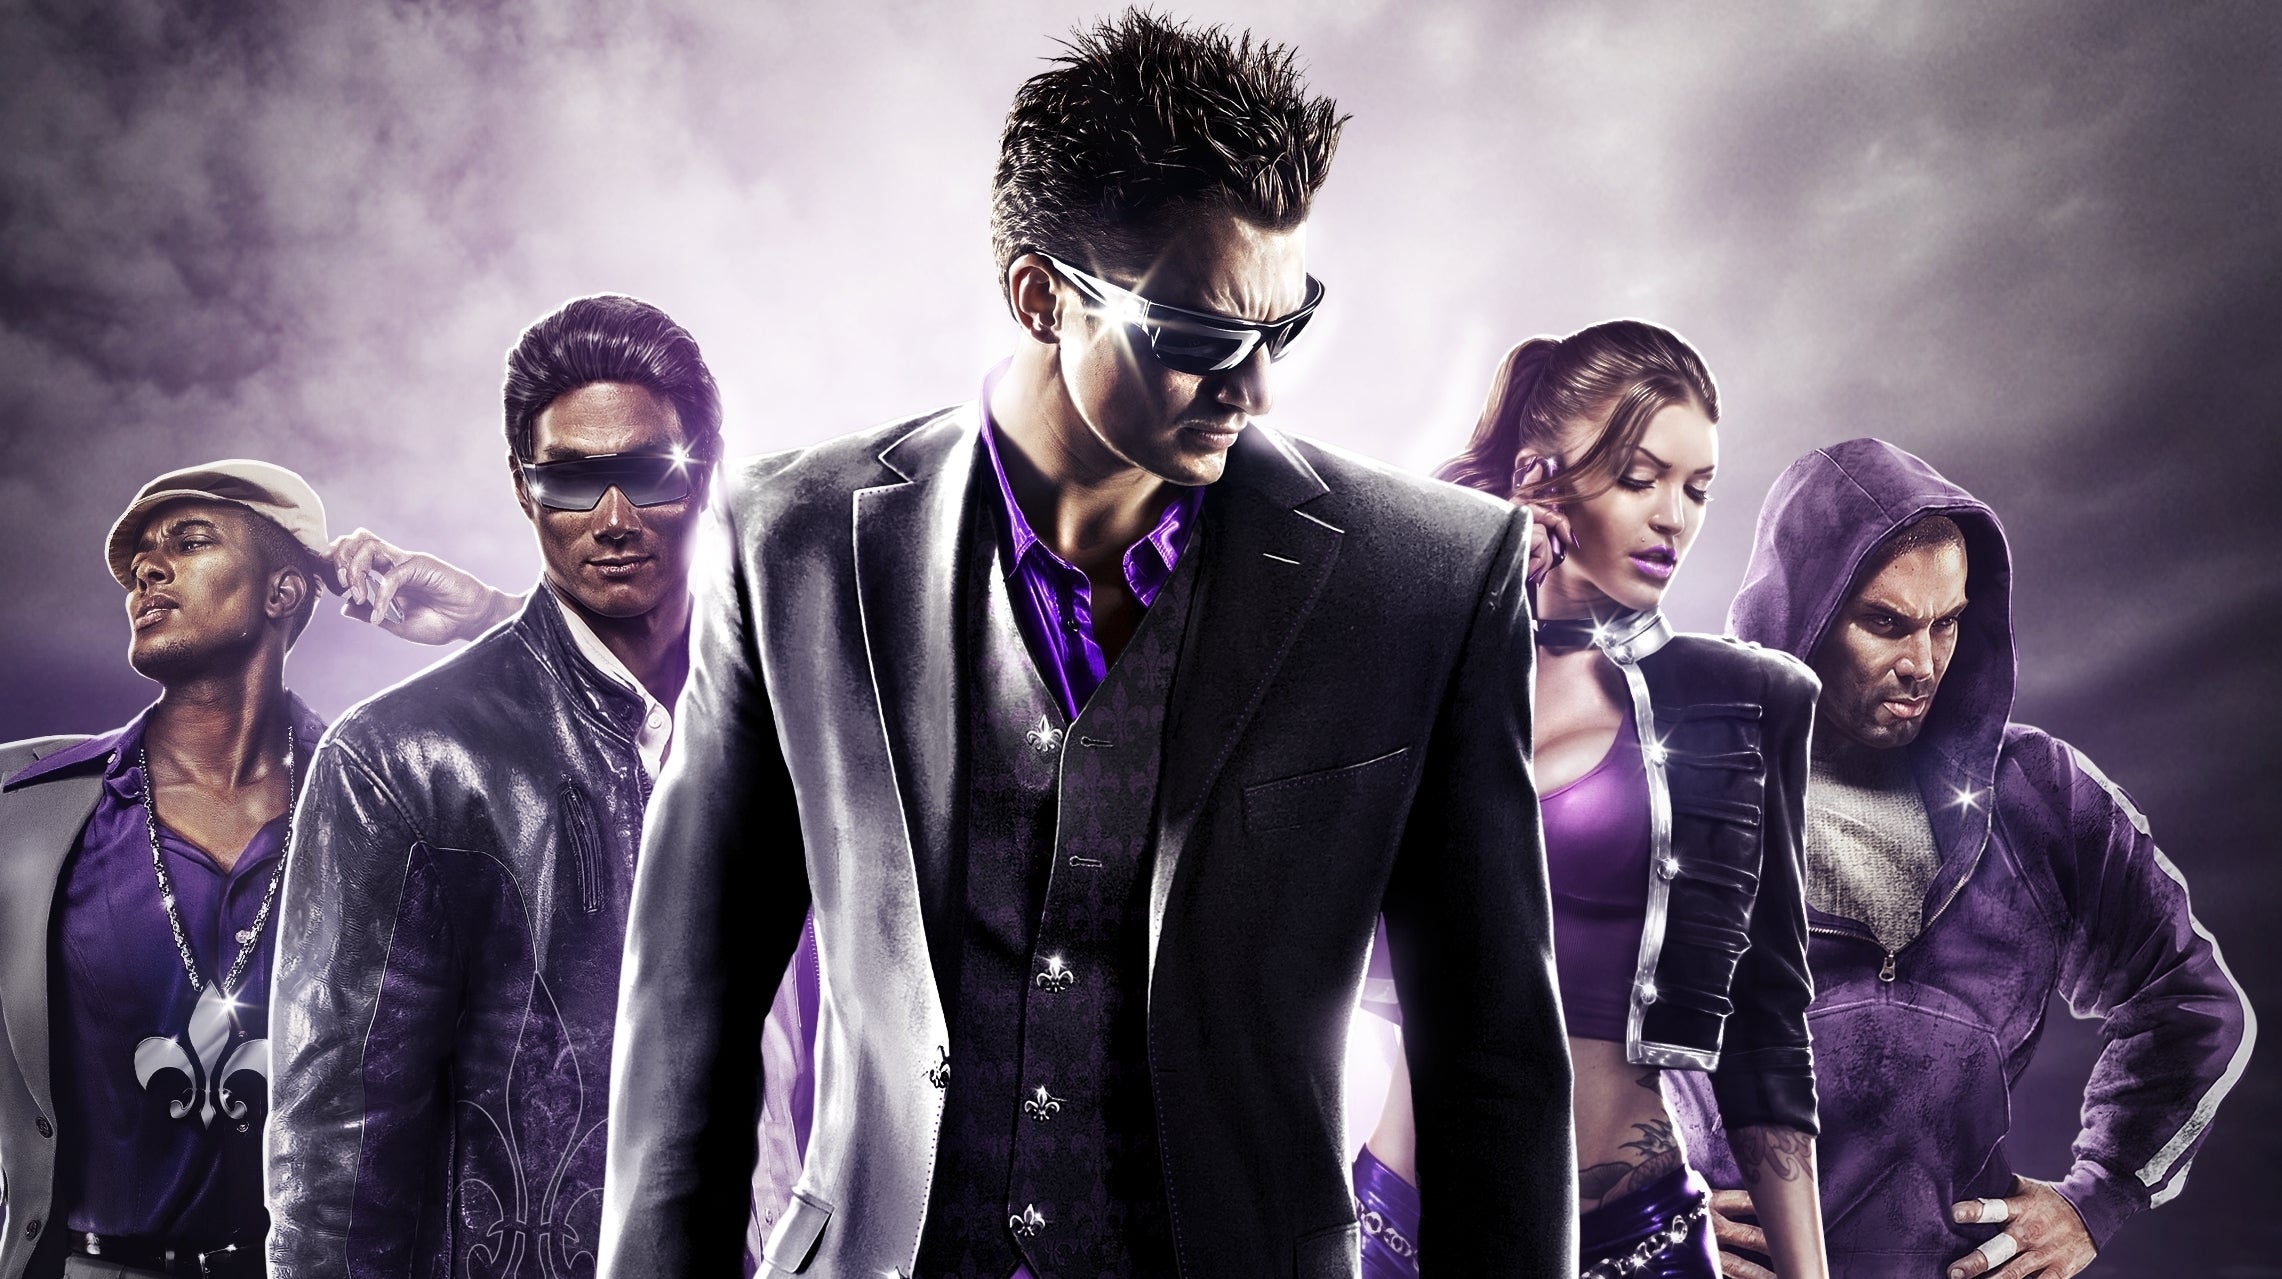 Image for We're not kidding - the Saints Row The Third remaster is exceptional